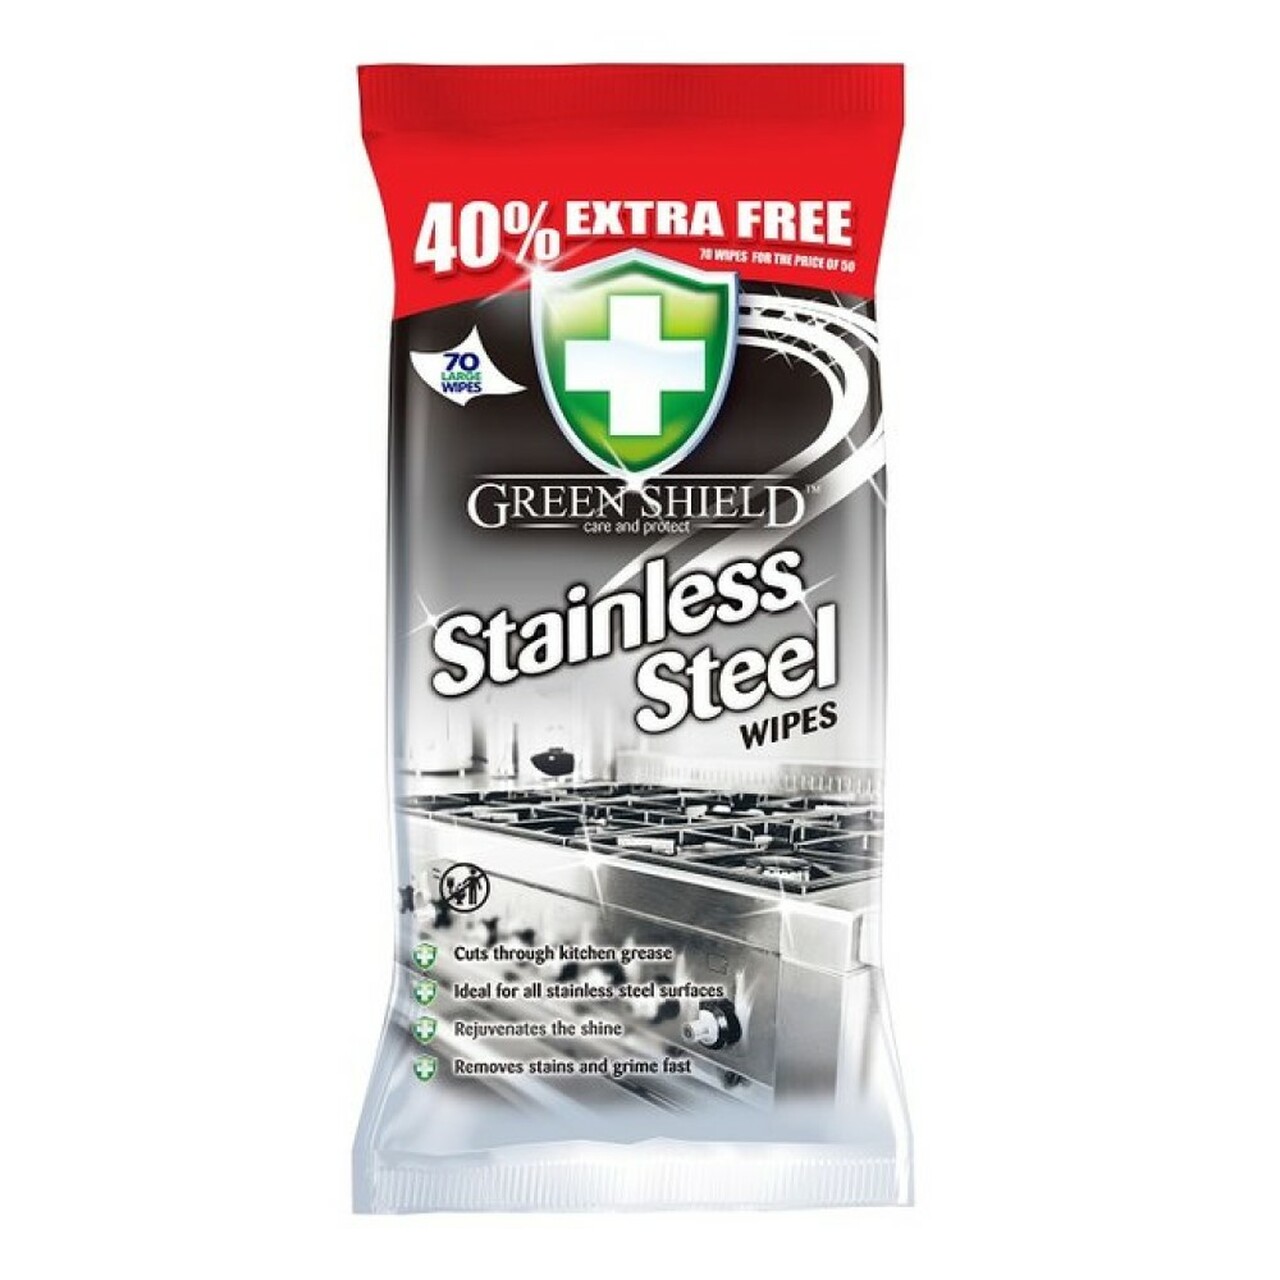 Green Shield Stainless Steel Wipes 70s